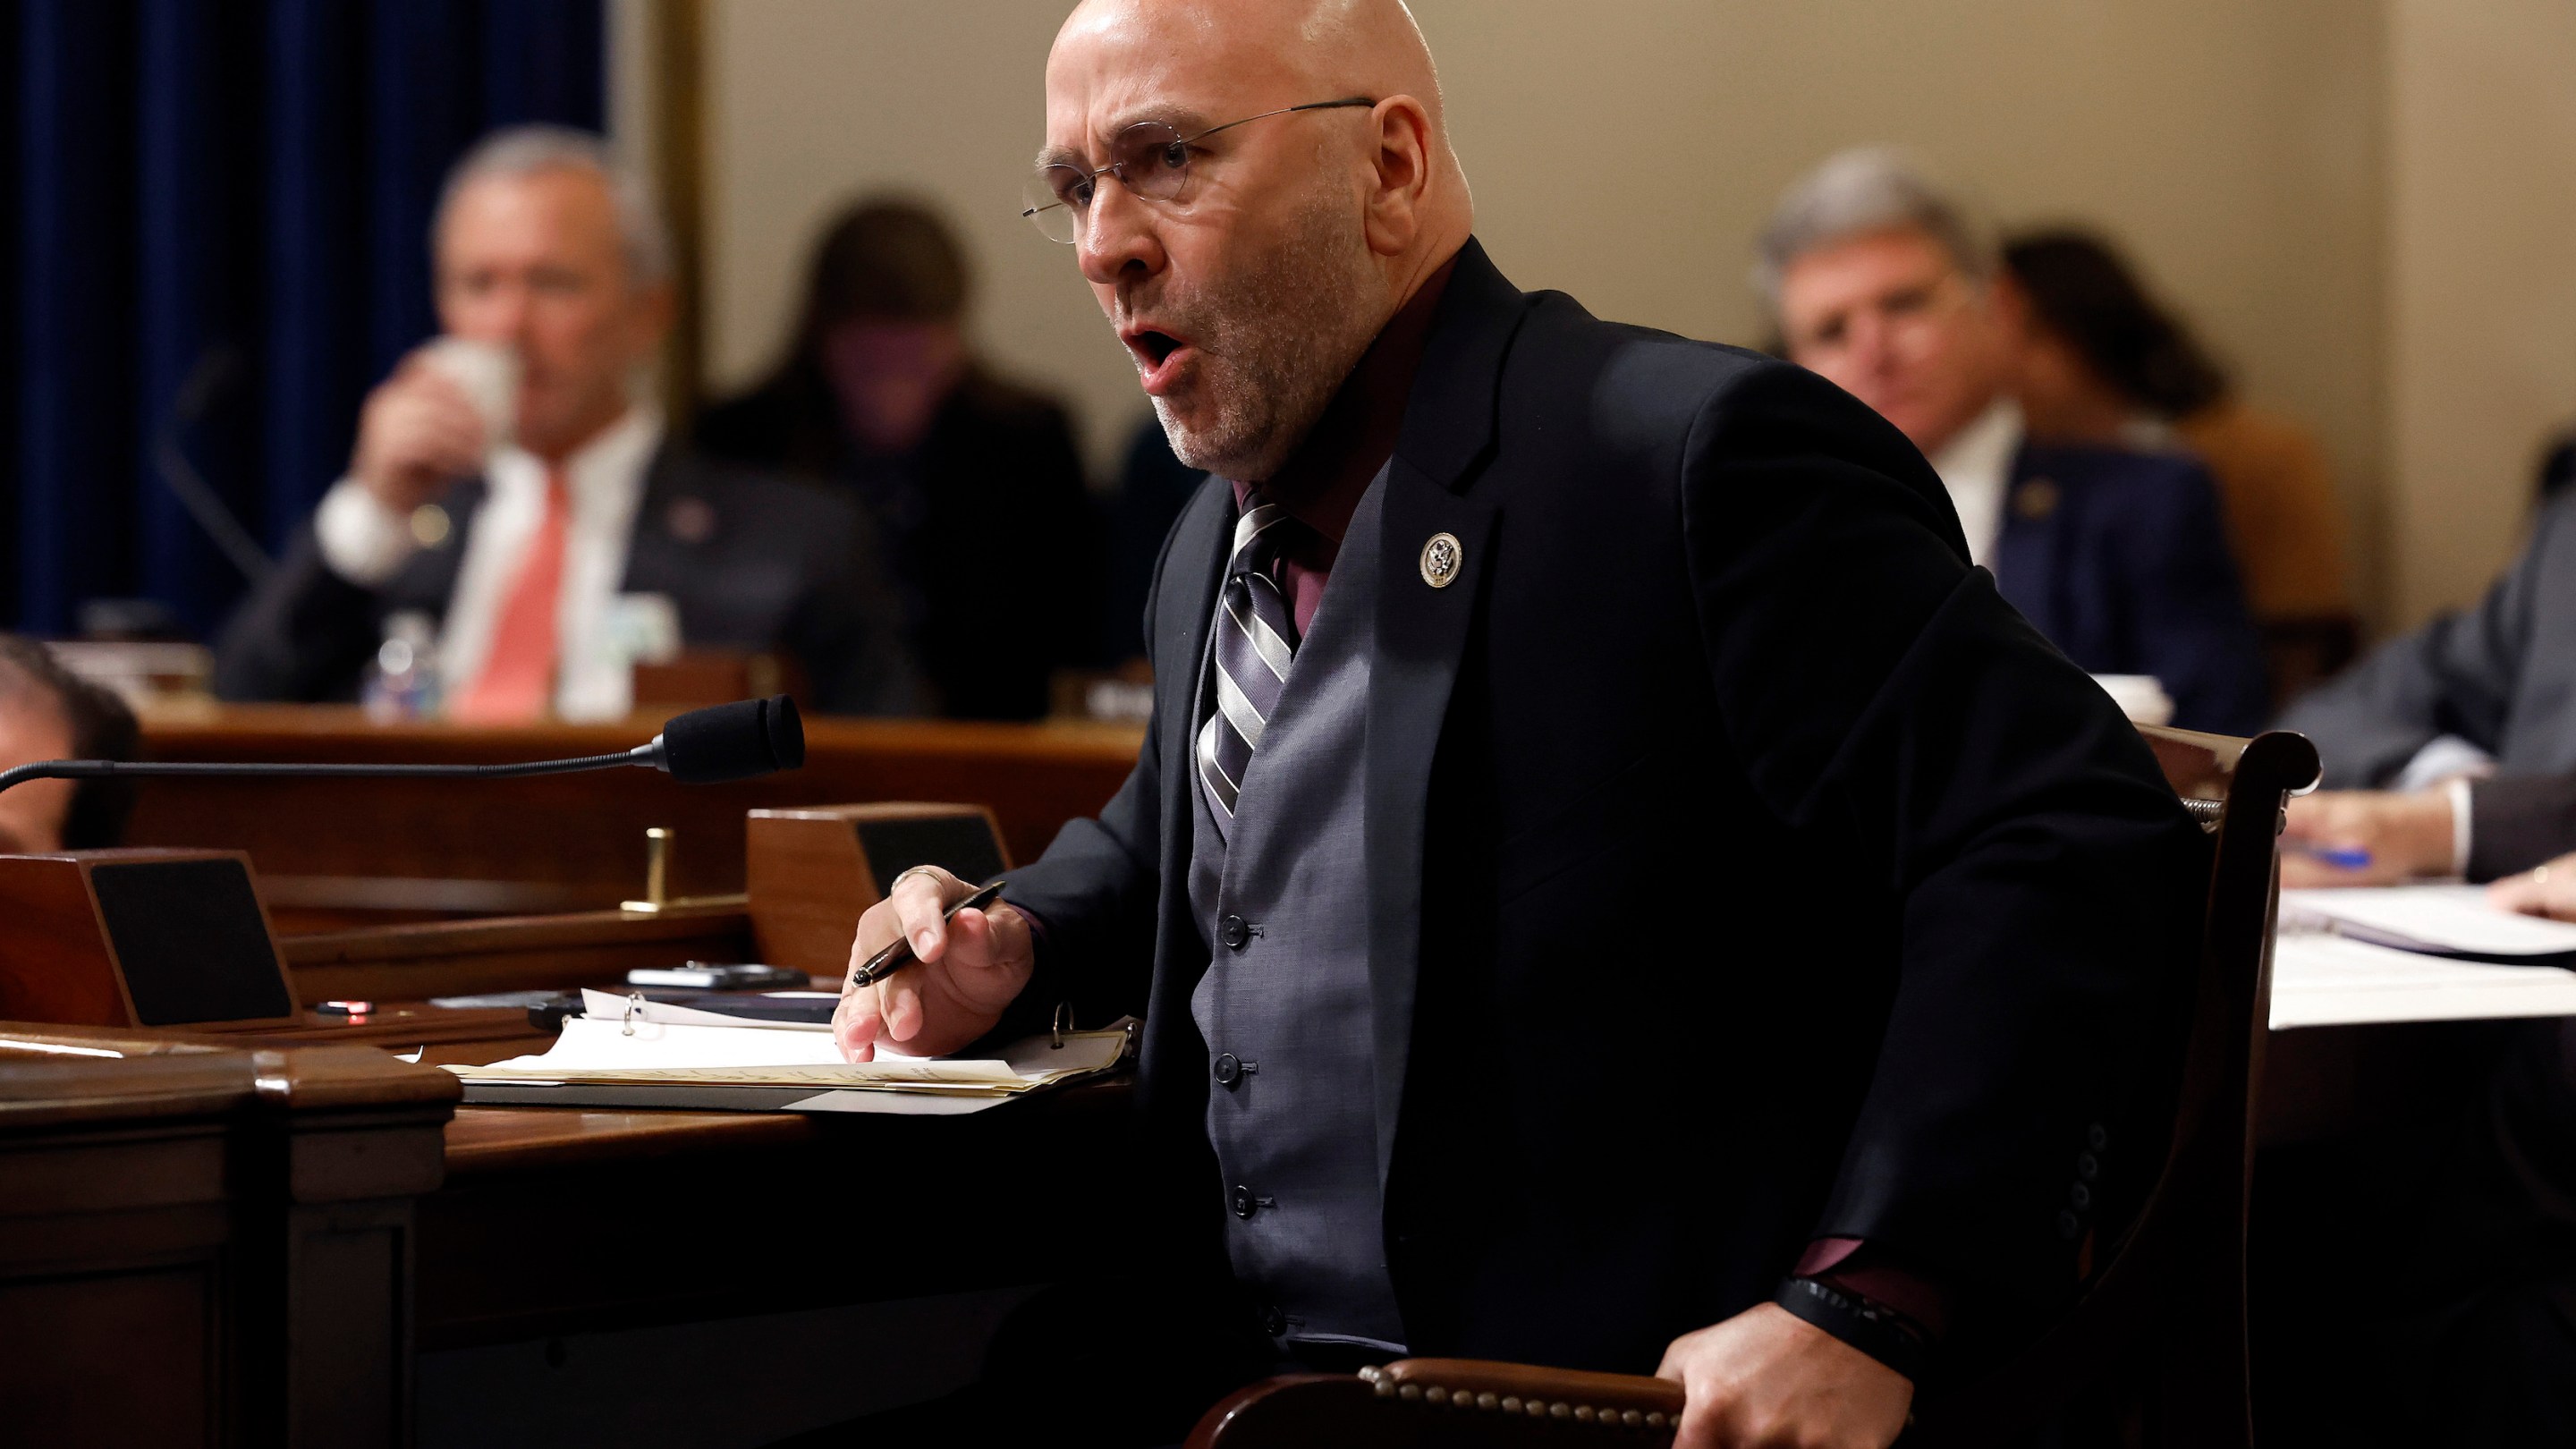 Rep. Clay Higgins (R-LA) questions Federal Bureau of Investigation Director Christopher Wray about conspiracy theories related to the January 6, 2020 attack on the U.S. Capitol during a hearing of the House Homeland Security Committee.